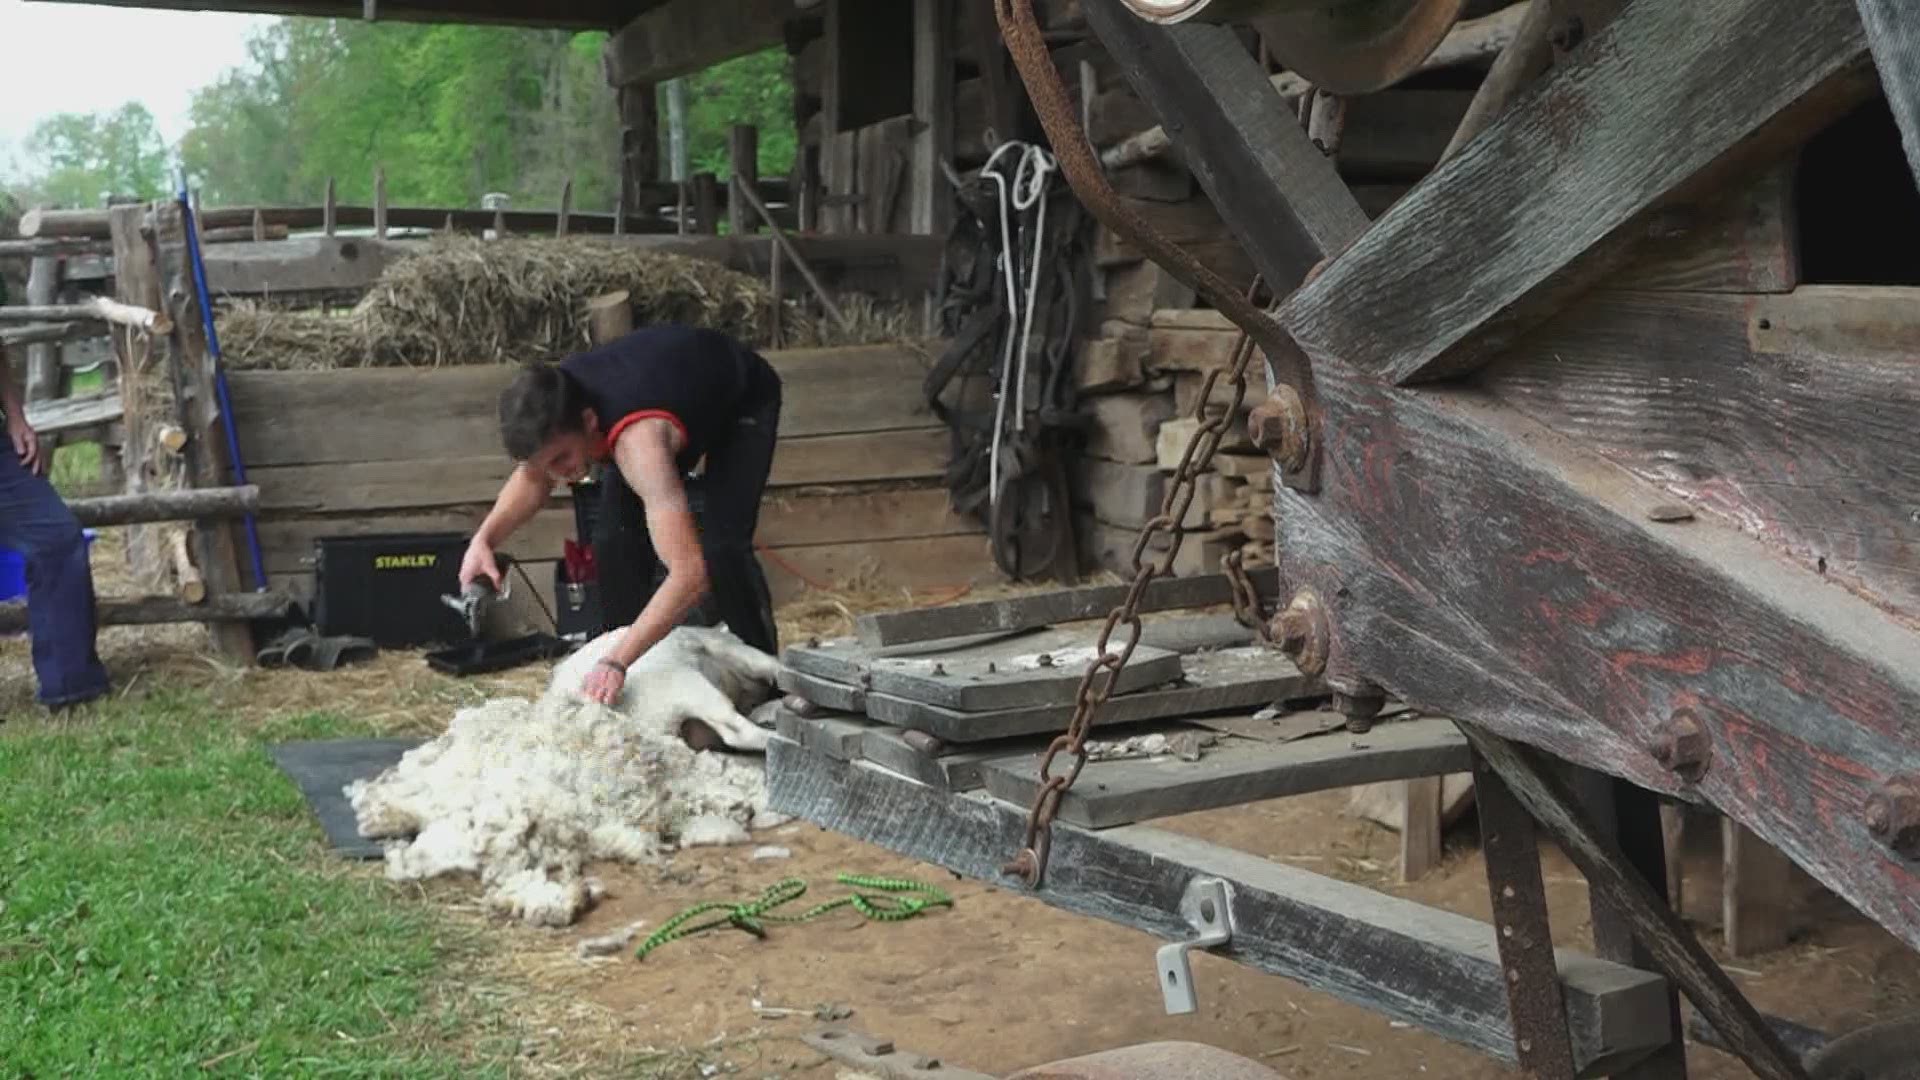 The Museum of Appalachia's Sheep Shearing event is May 1. Visit museumofappalachia.org to learn more. April 29, 2021-4pm.